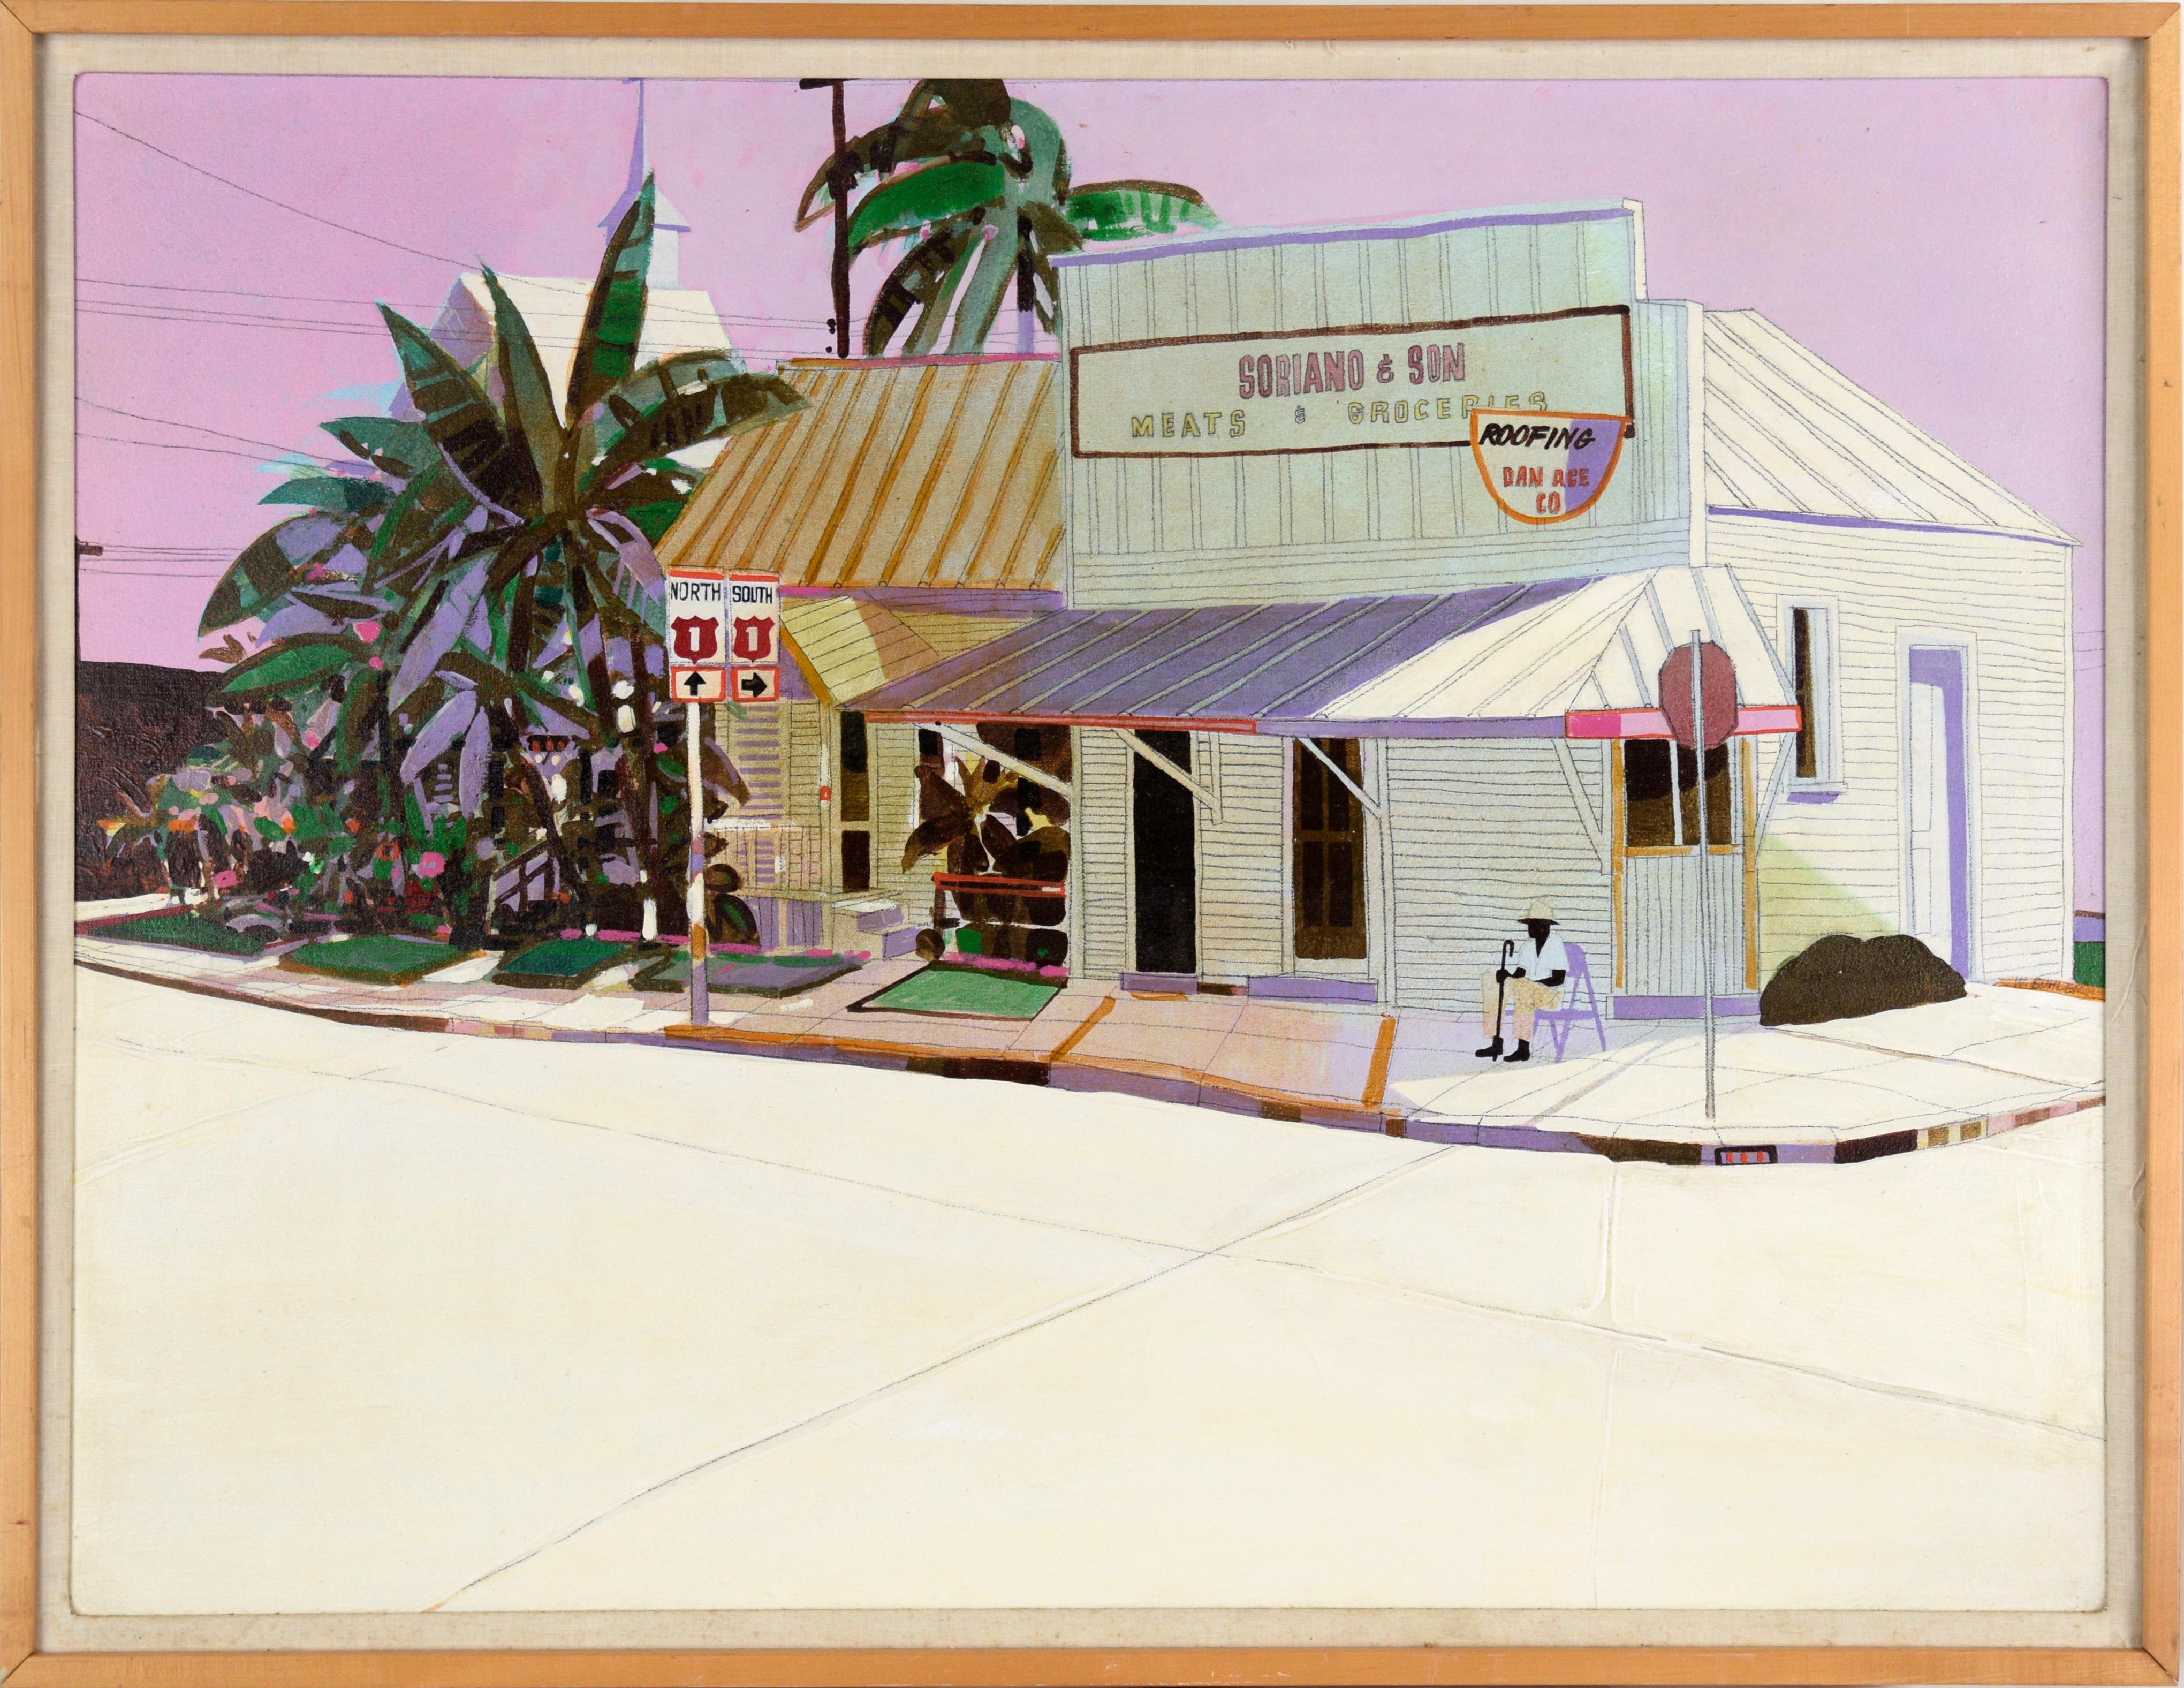 Soriano’s Market, Key West, Florida - Landscape in Acrylic on Canvas 